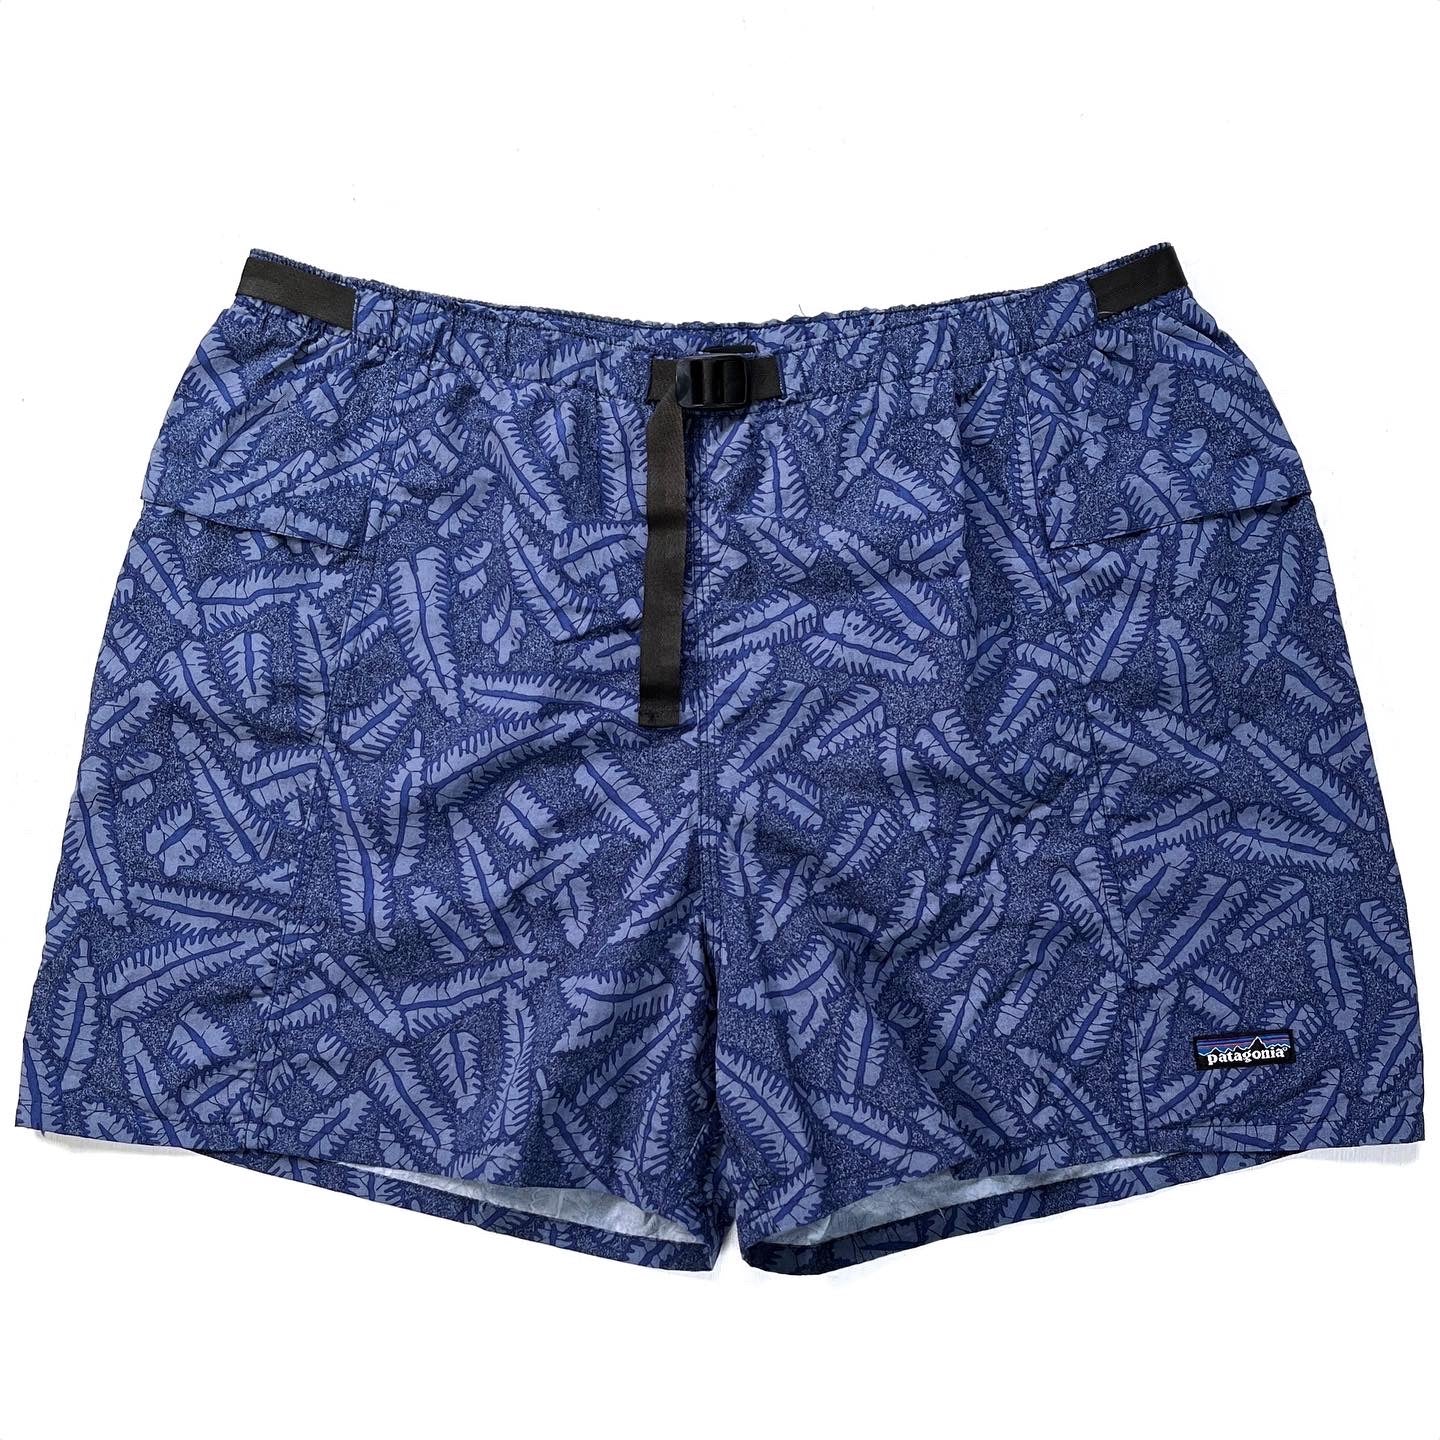 1996 Patagonia Mens 4” Printed River Shorts, Spiney: Blueberry (XL)